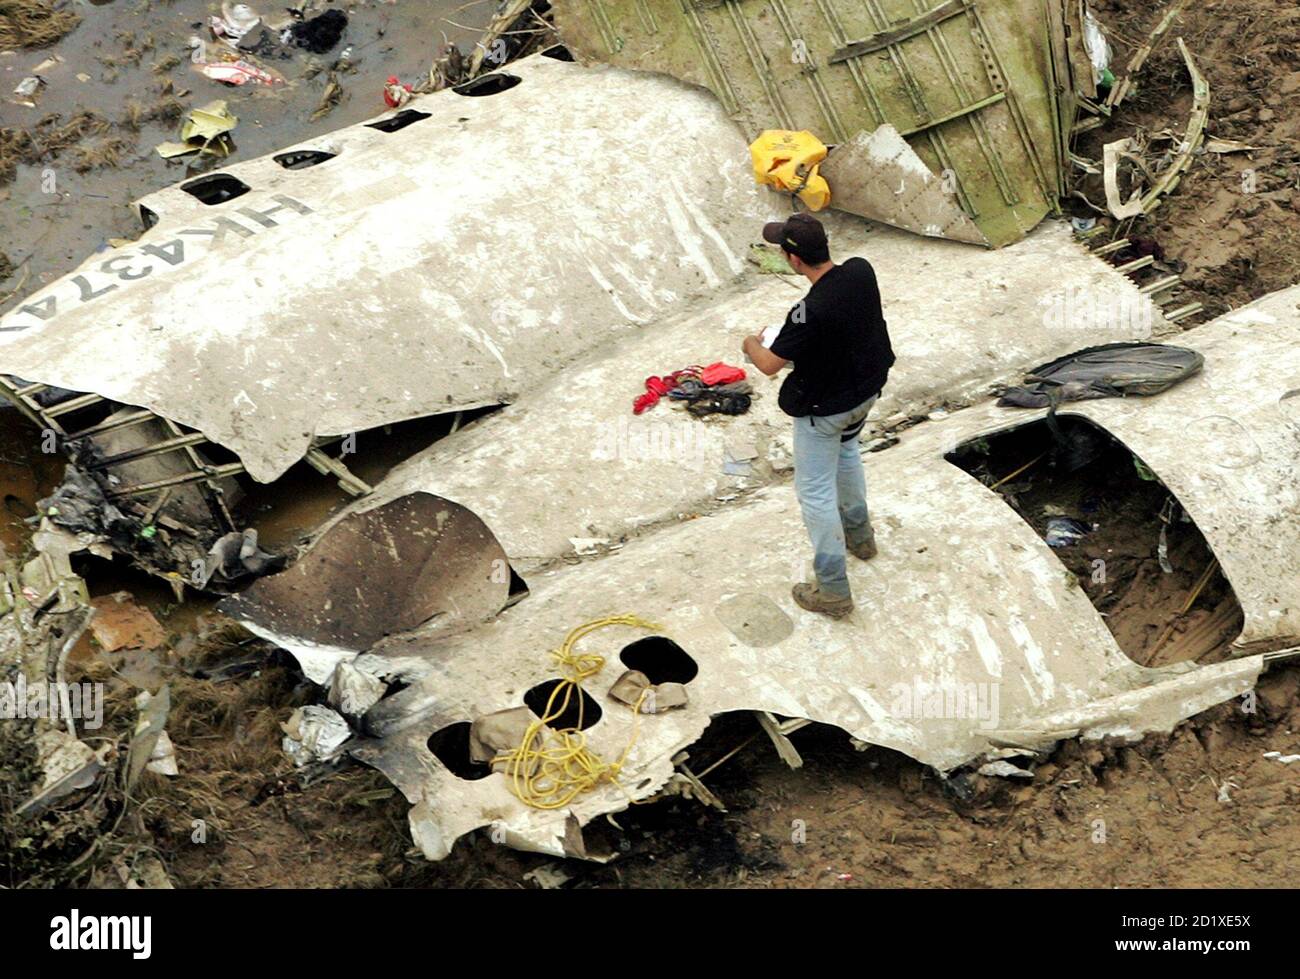 Rescue workers search the wreckage of the West Caribbean Airways MD-82  aircraft in Machiques, about 100 miles (161 km) southwest of Maracaibo,  Venezuela, August 17, 2005. Investigators sifted for bodies and clues